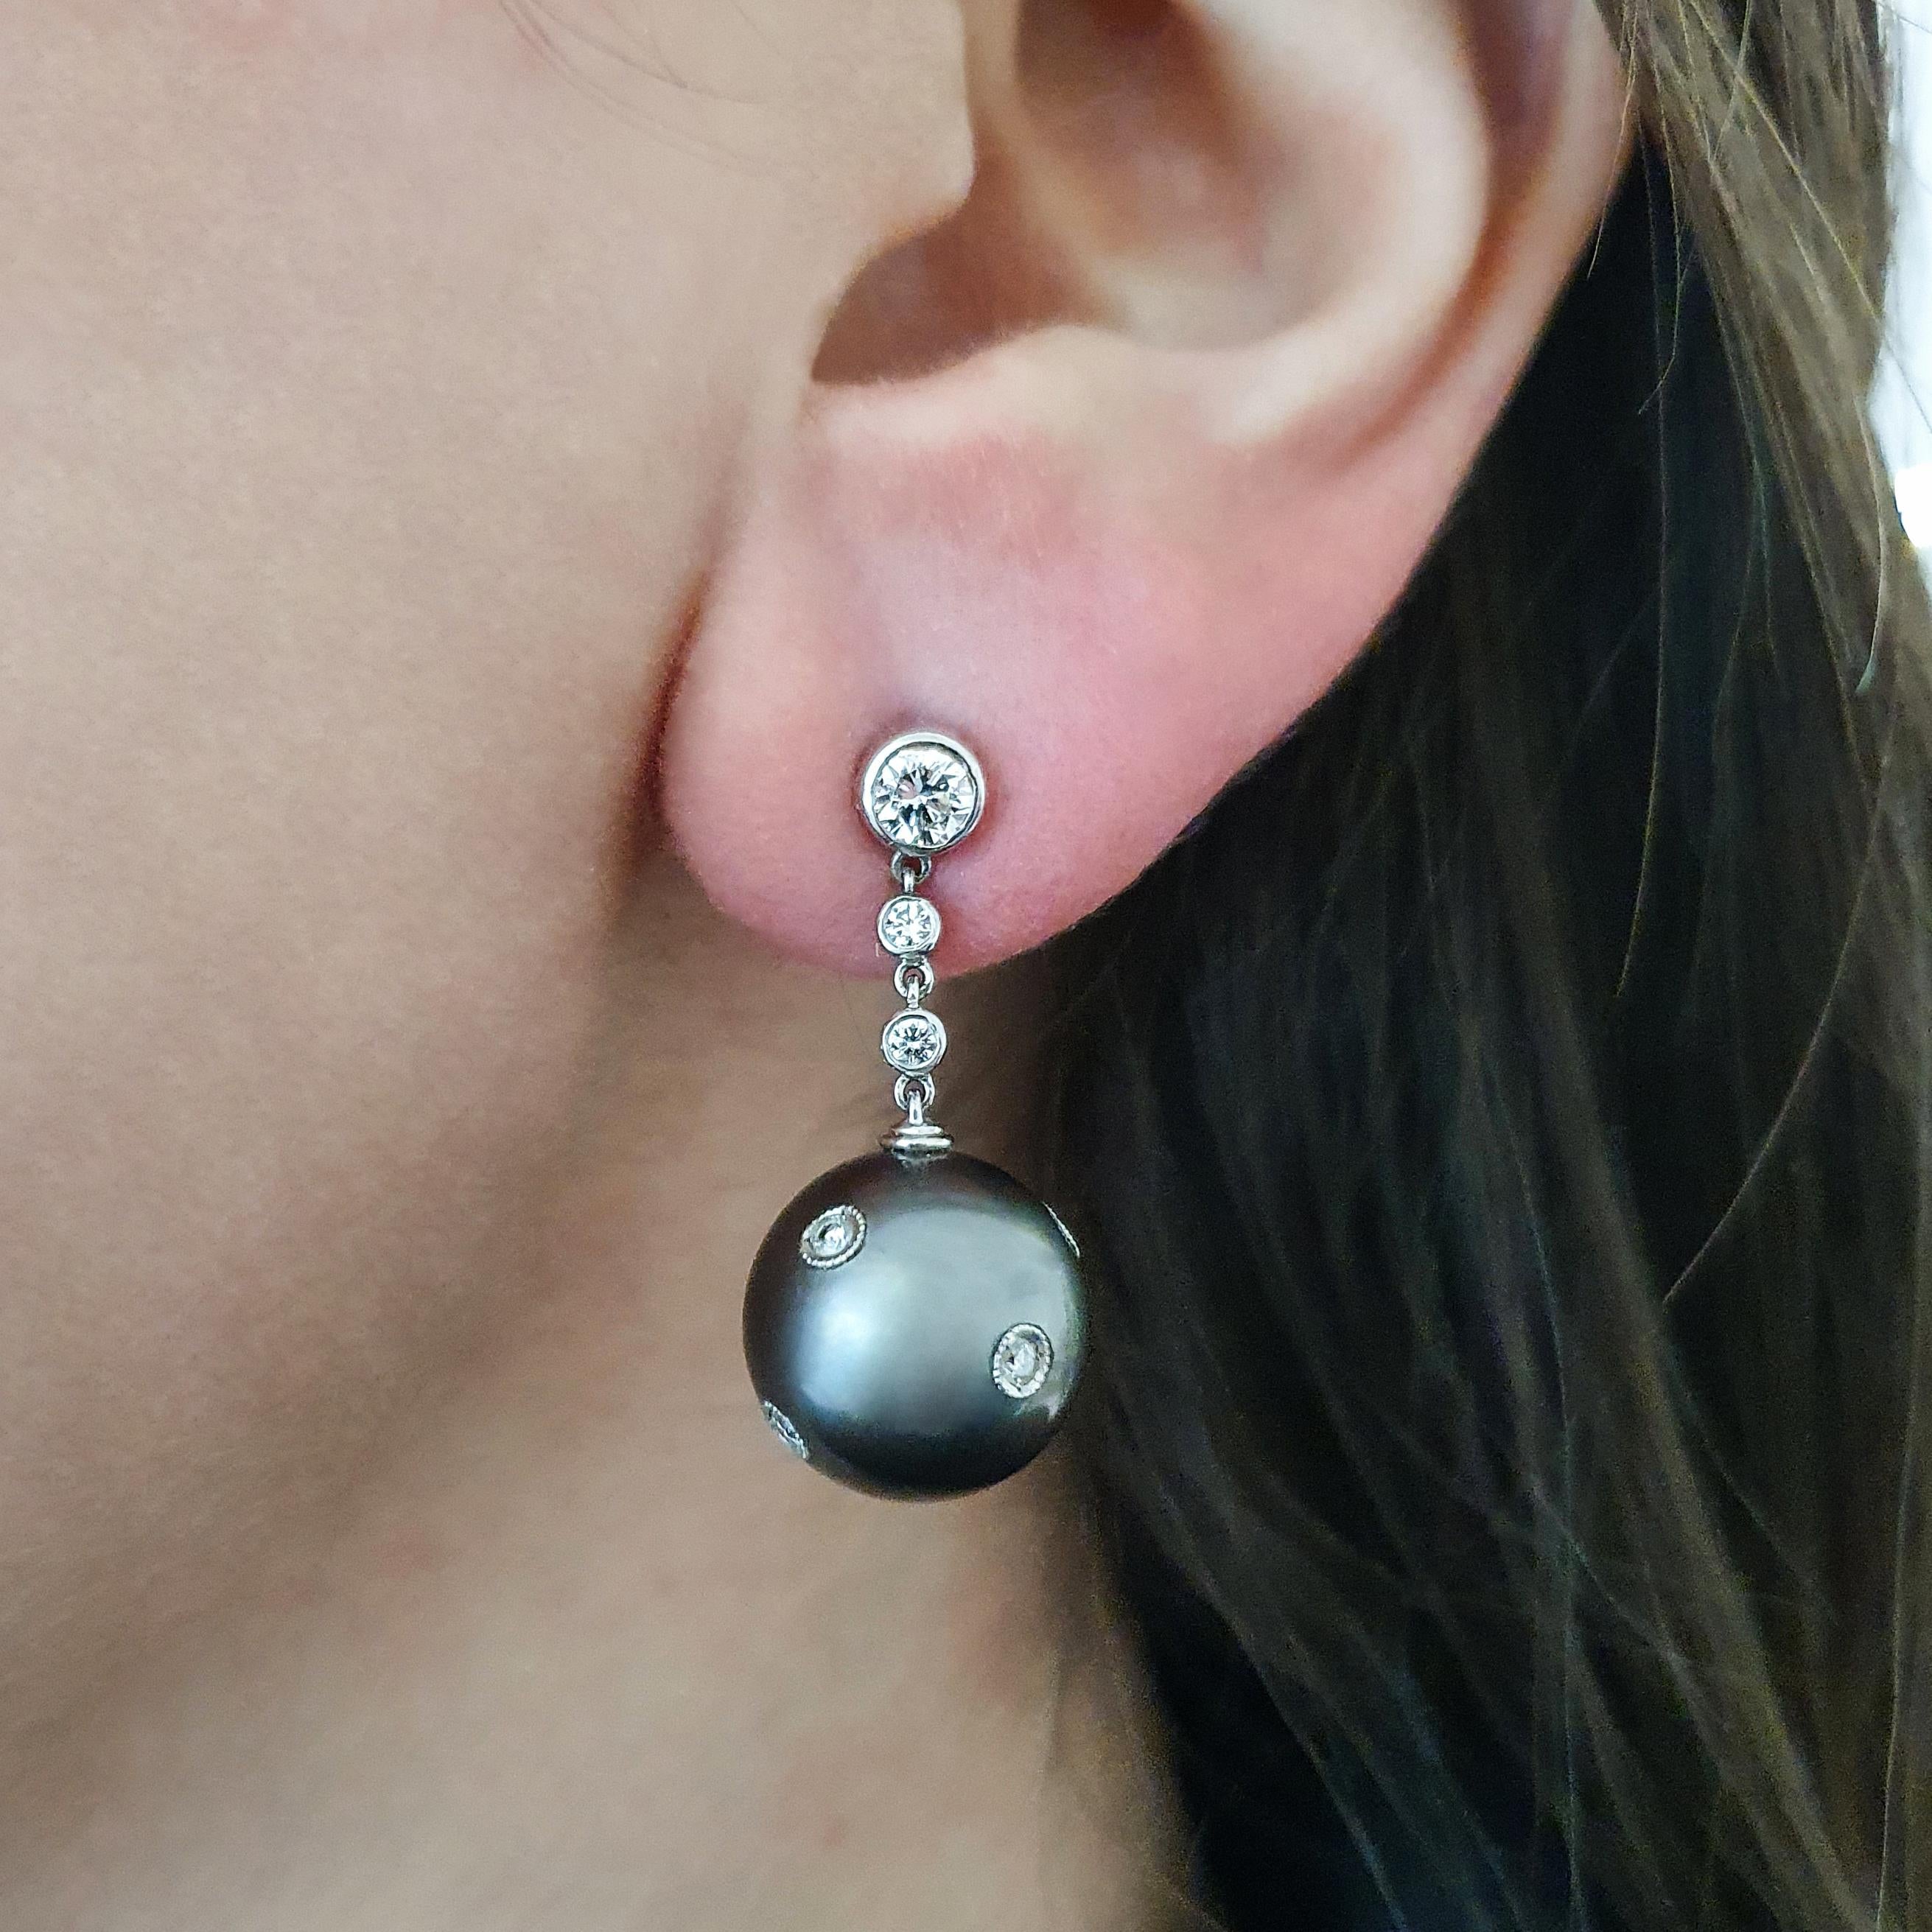 Black Pearl and Diamond on White Gold 18k Earrings.

Total weight: 12.12 grams
Total height: 1.18 inch (3.00 centimeters).